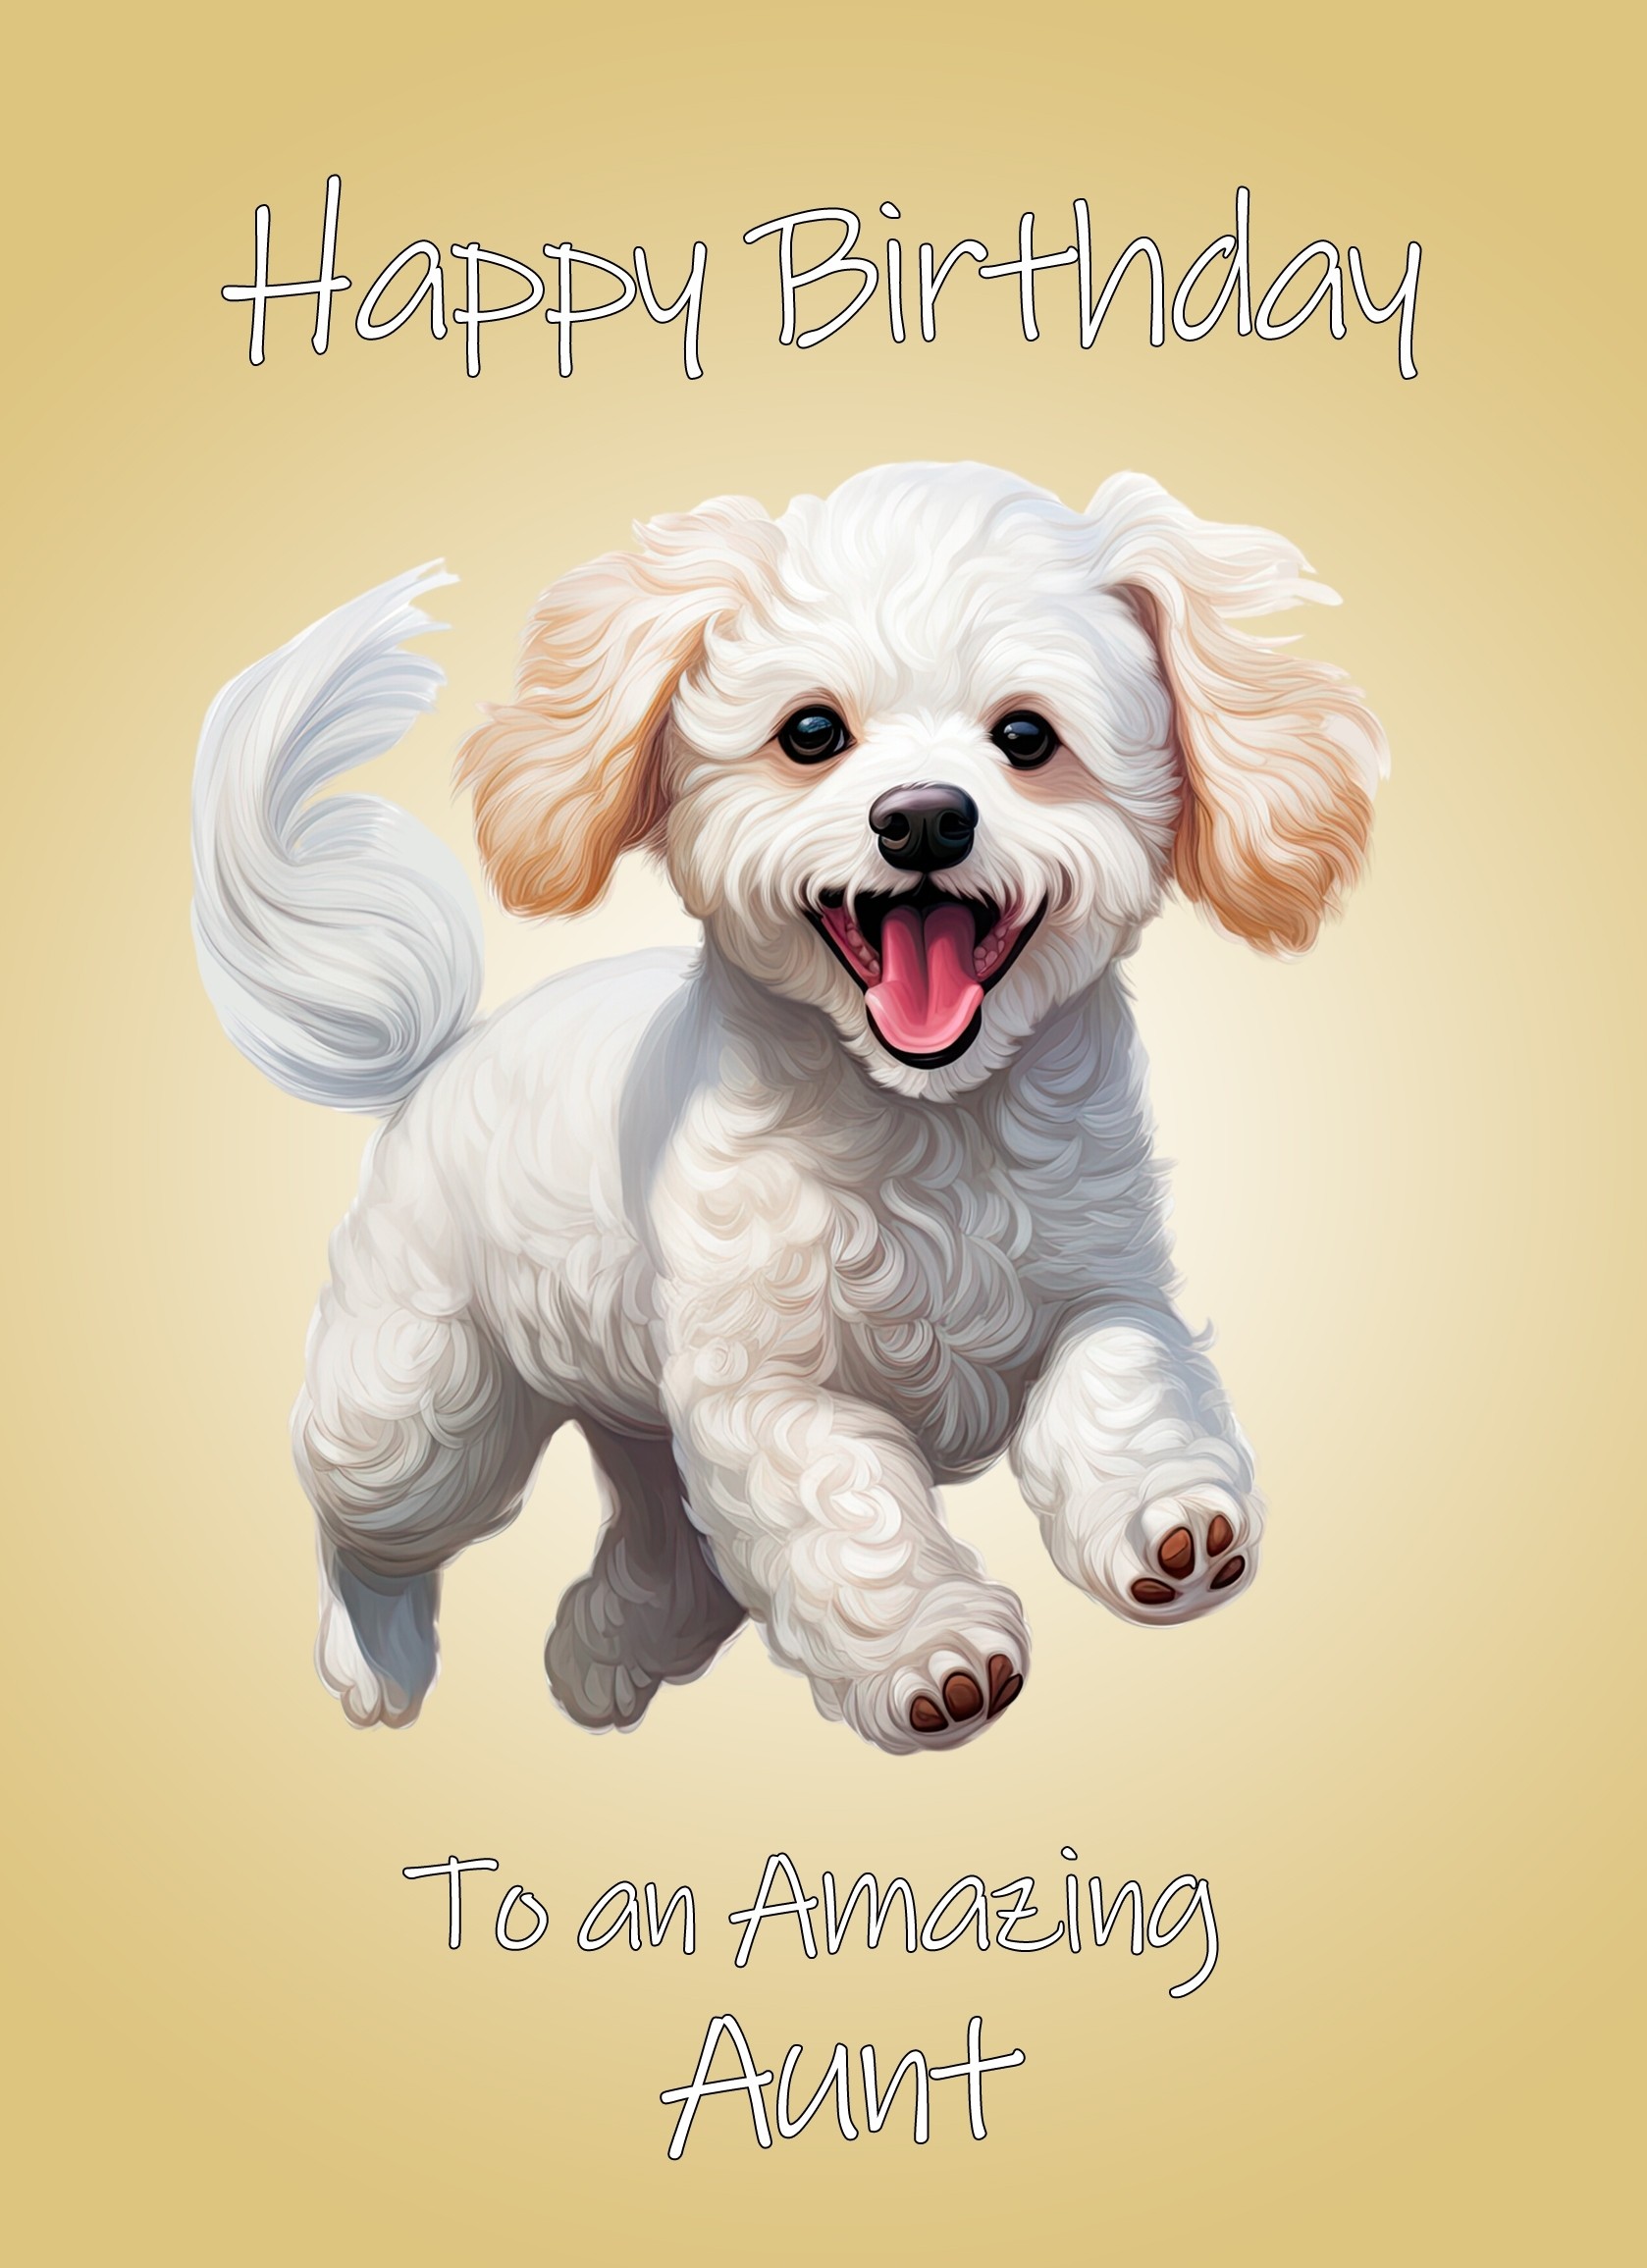 Poodle Dog Birthday Card For Aunt